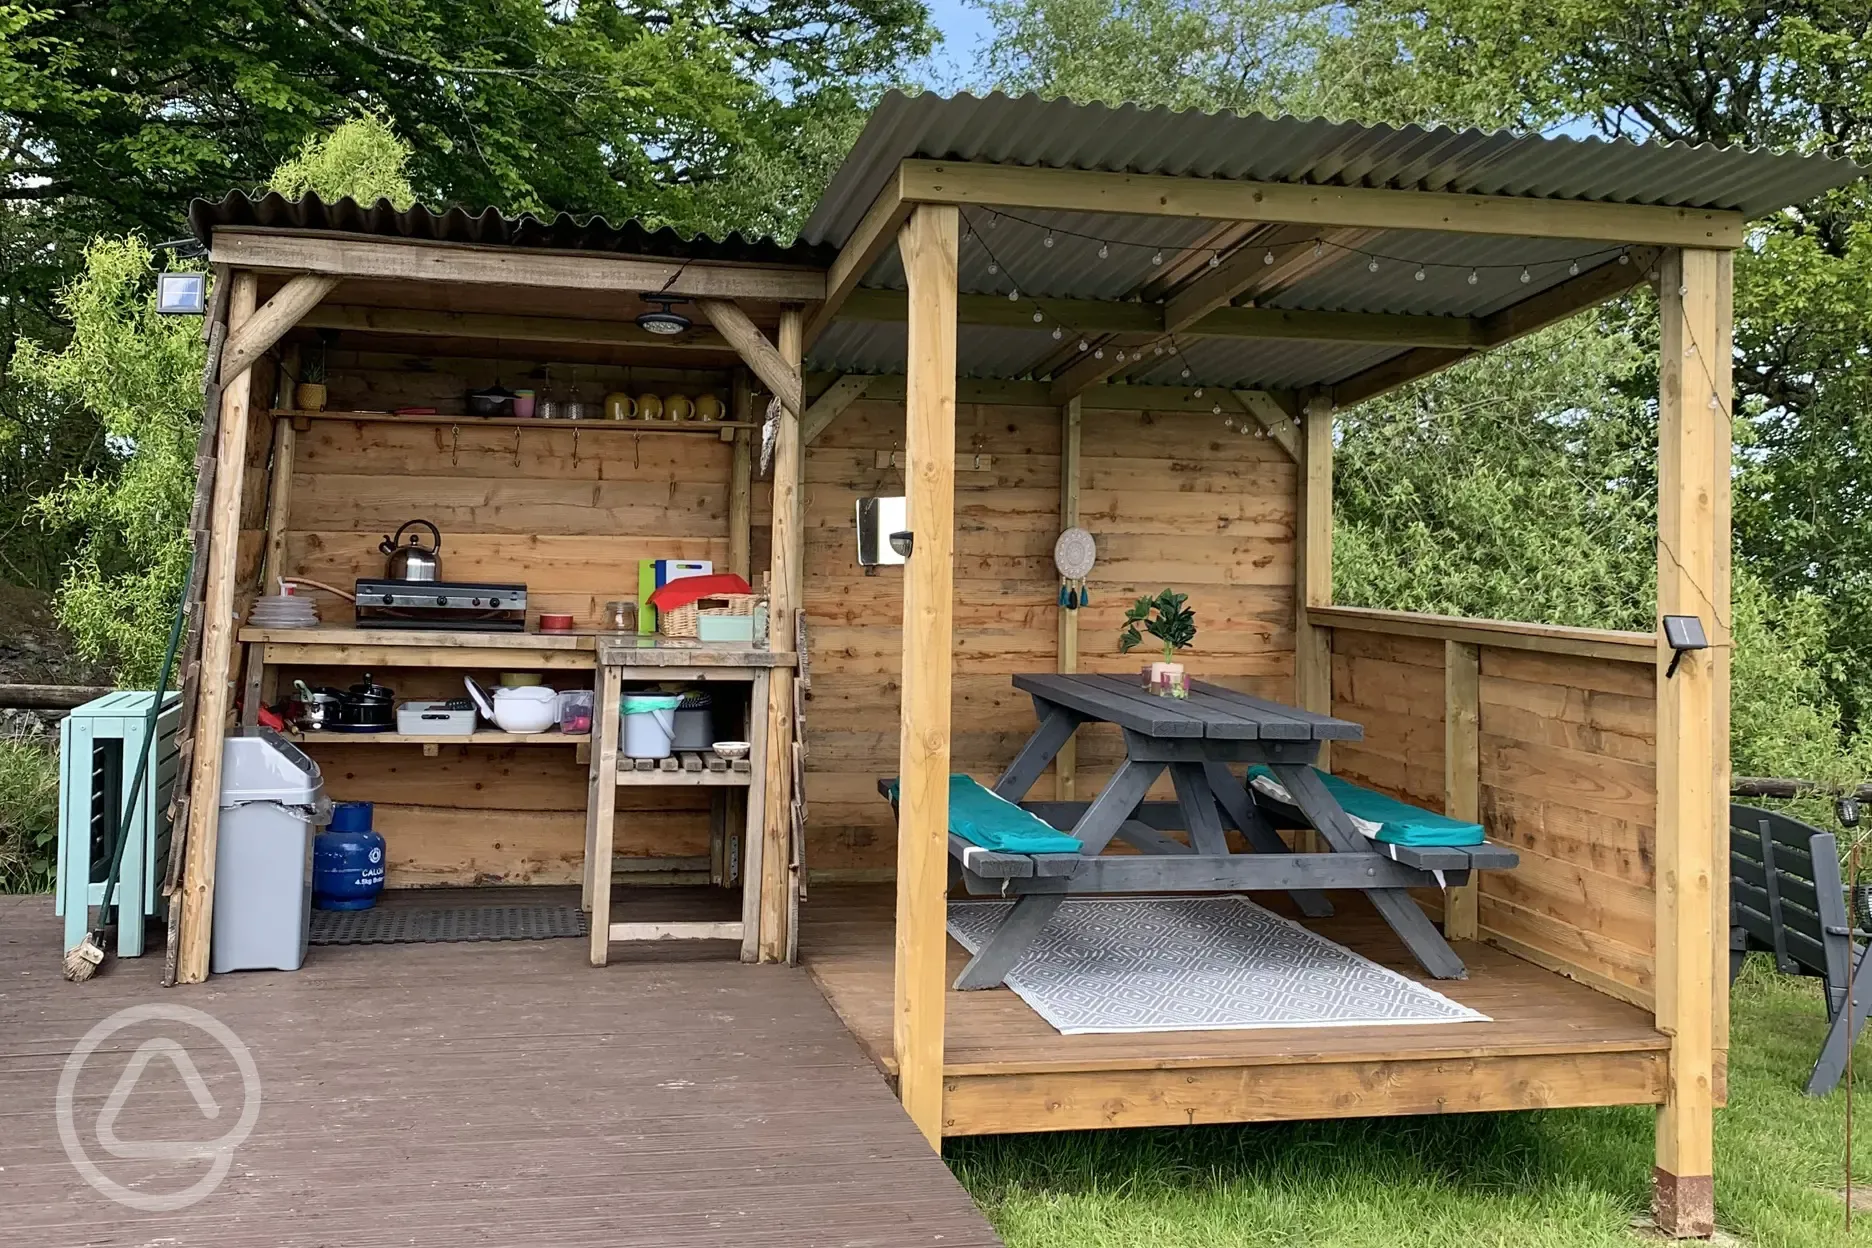 Yurt outdoor kitchen and picnic bench